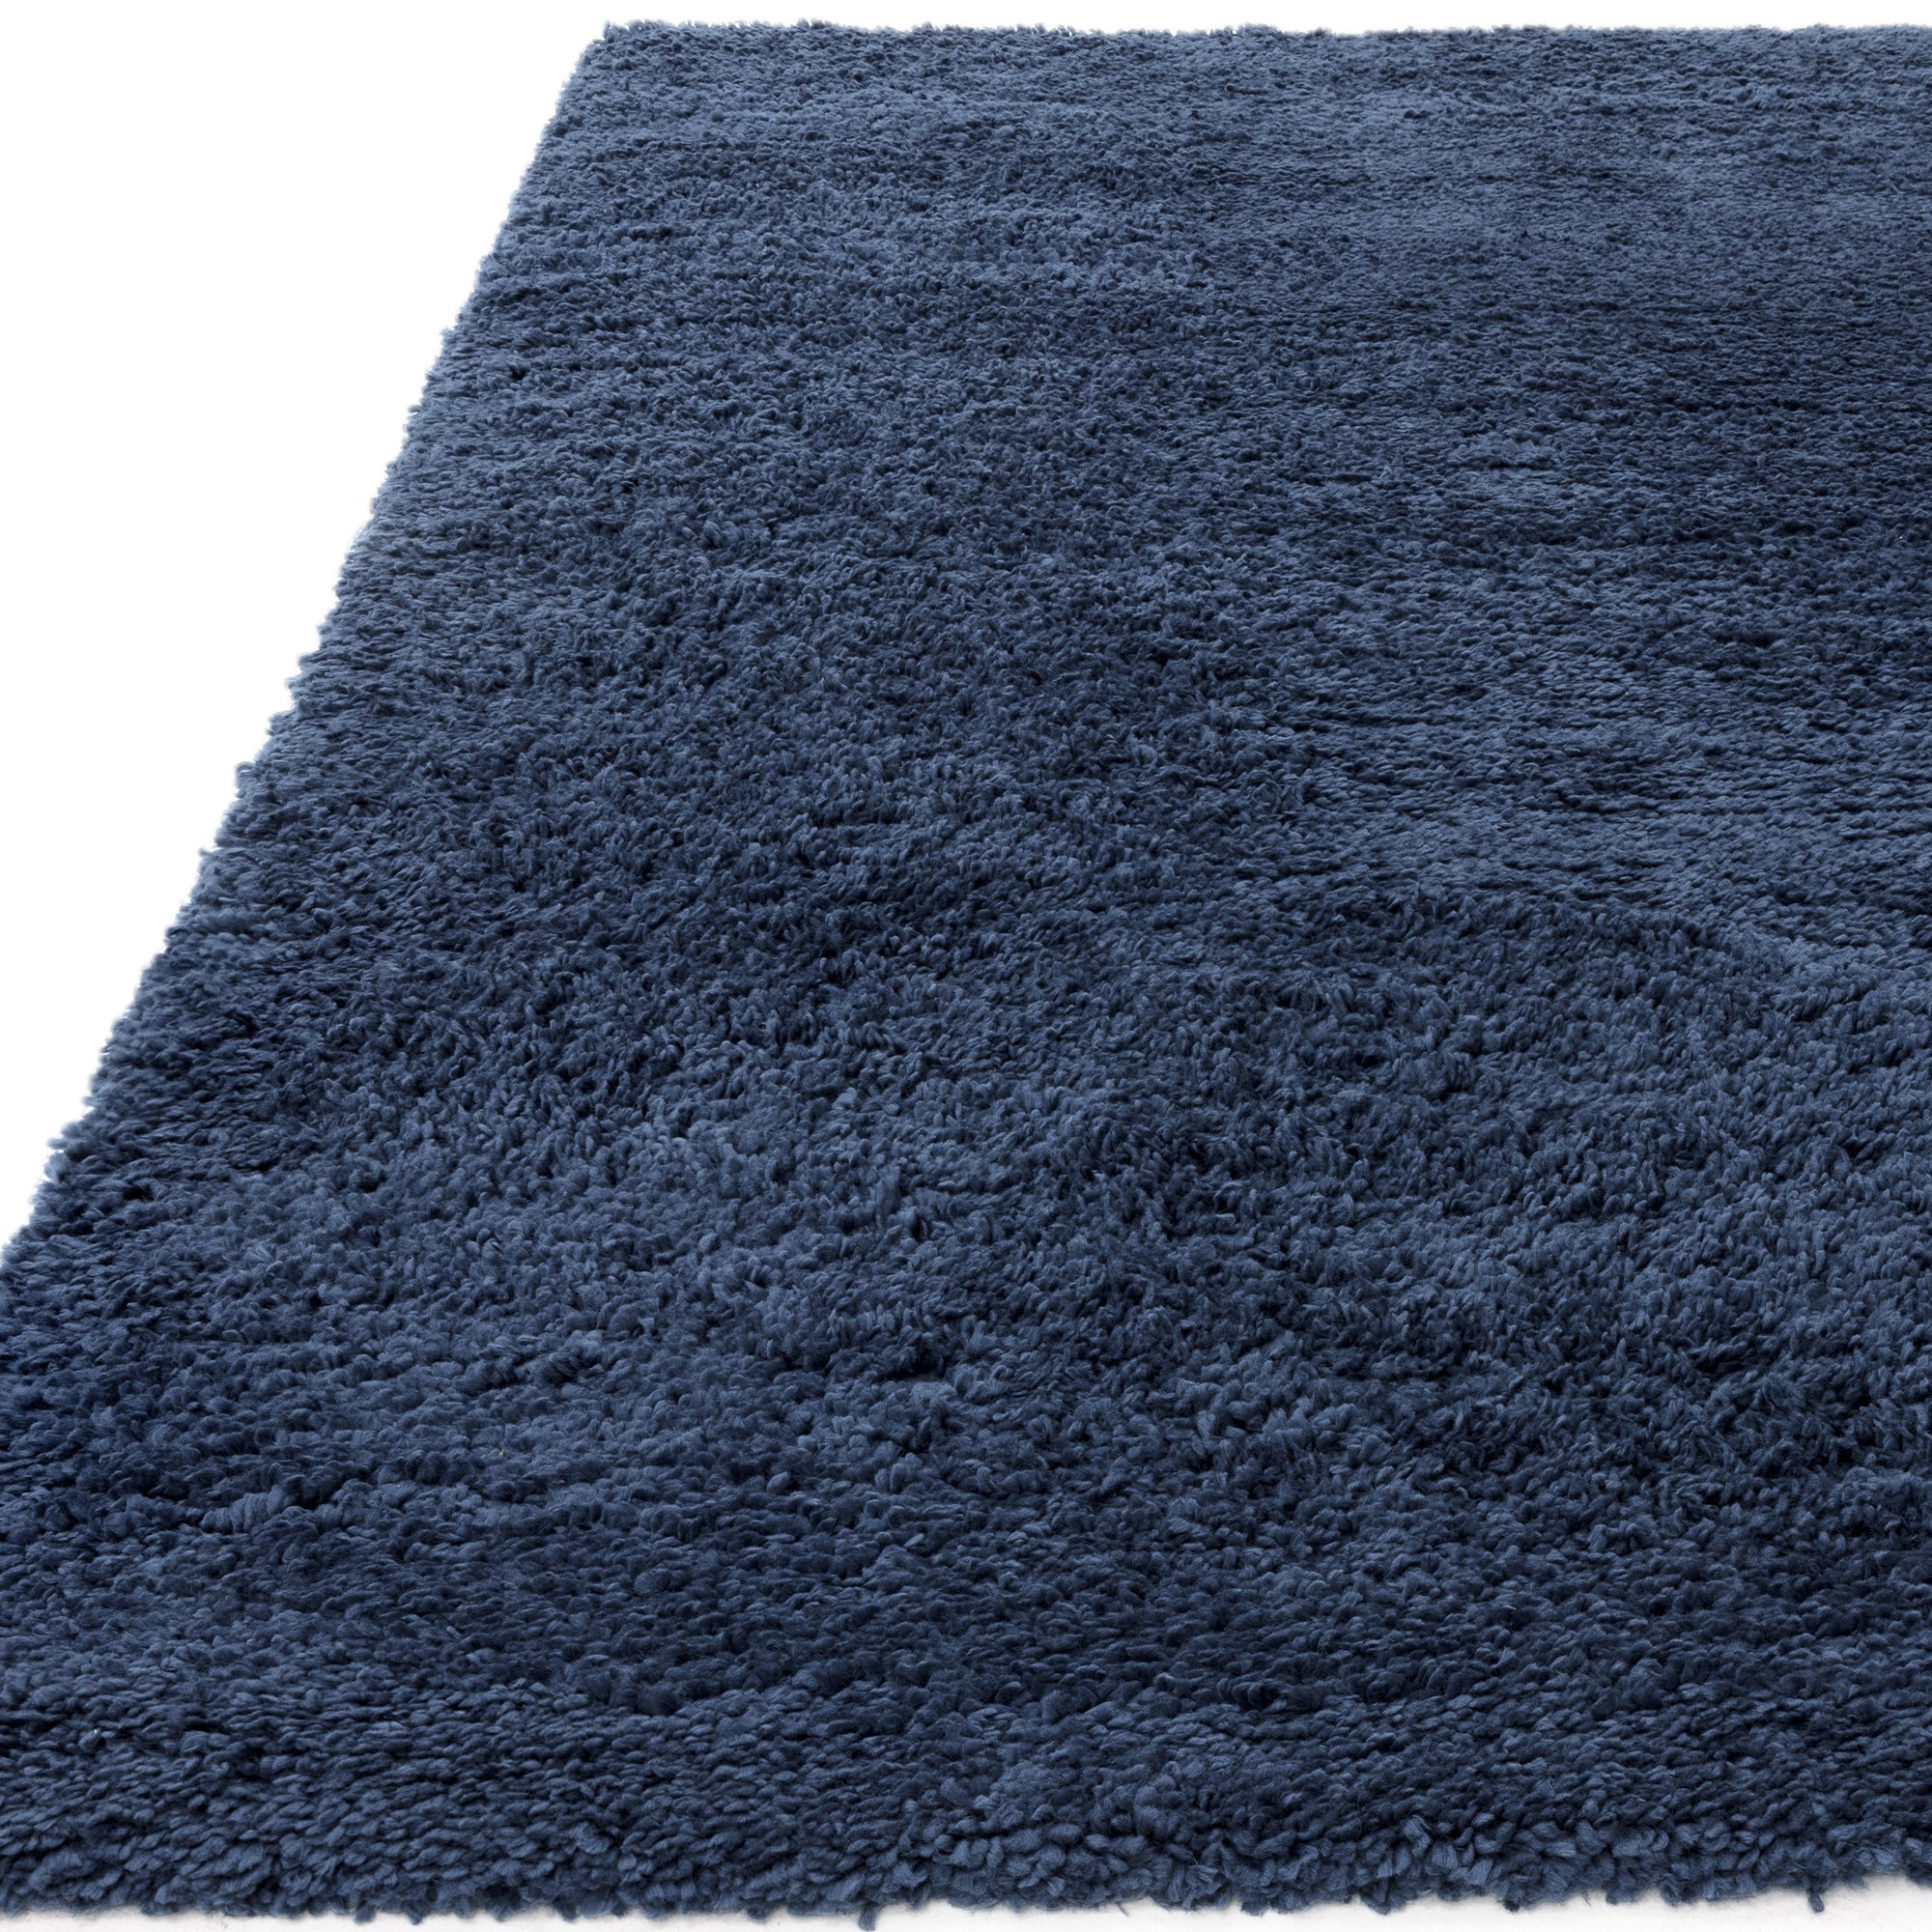 Ritchie Blue Rug